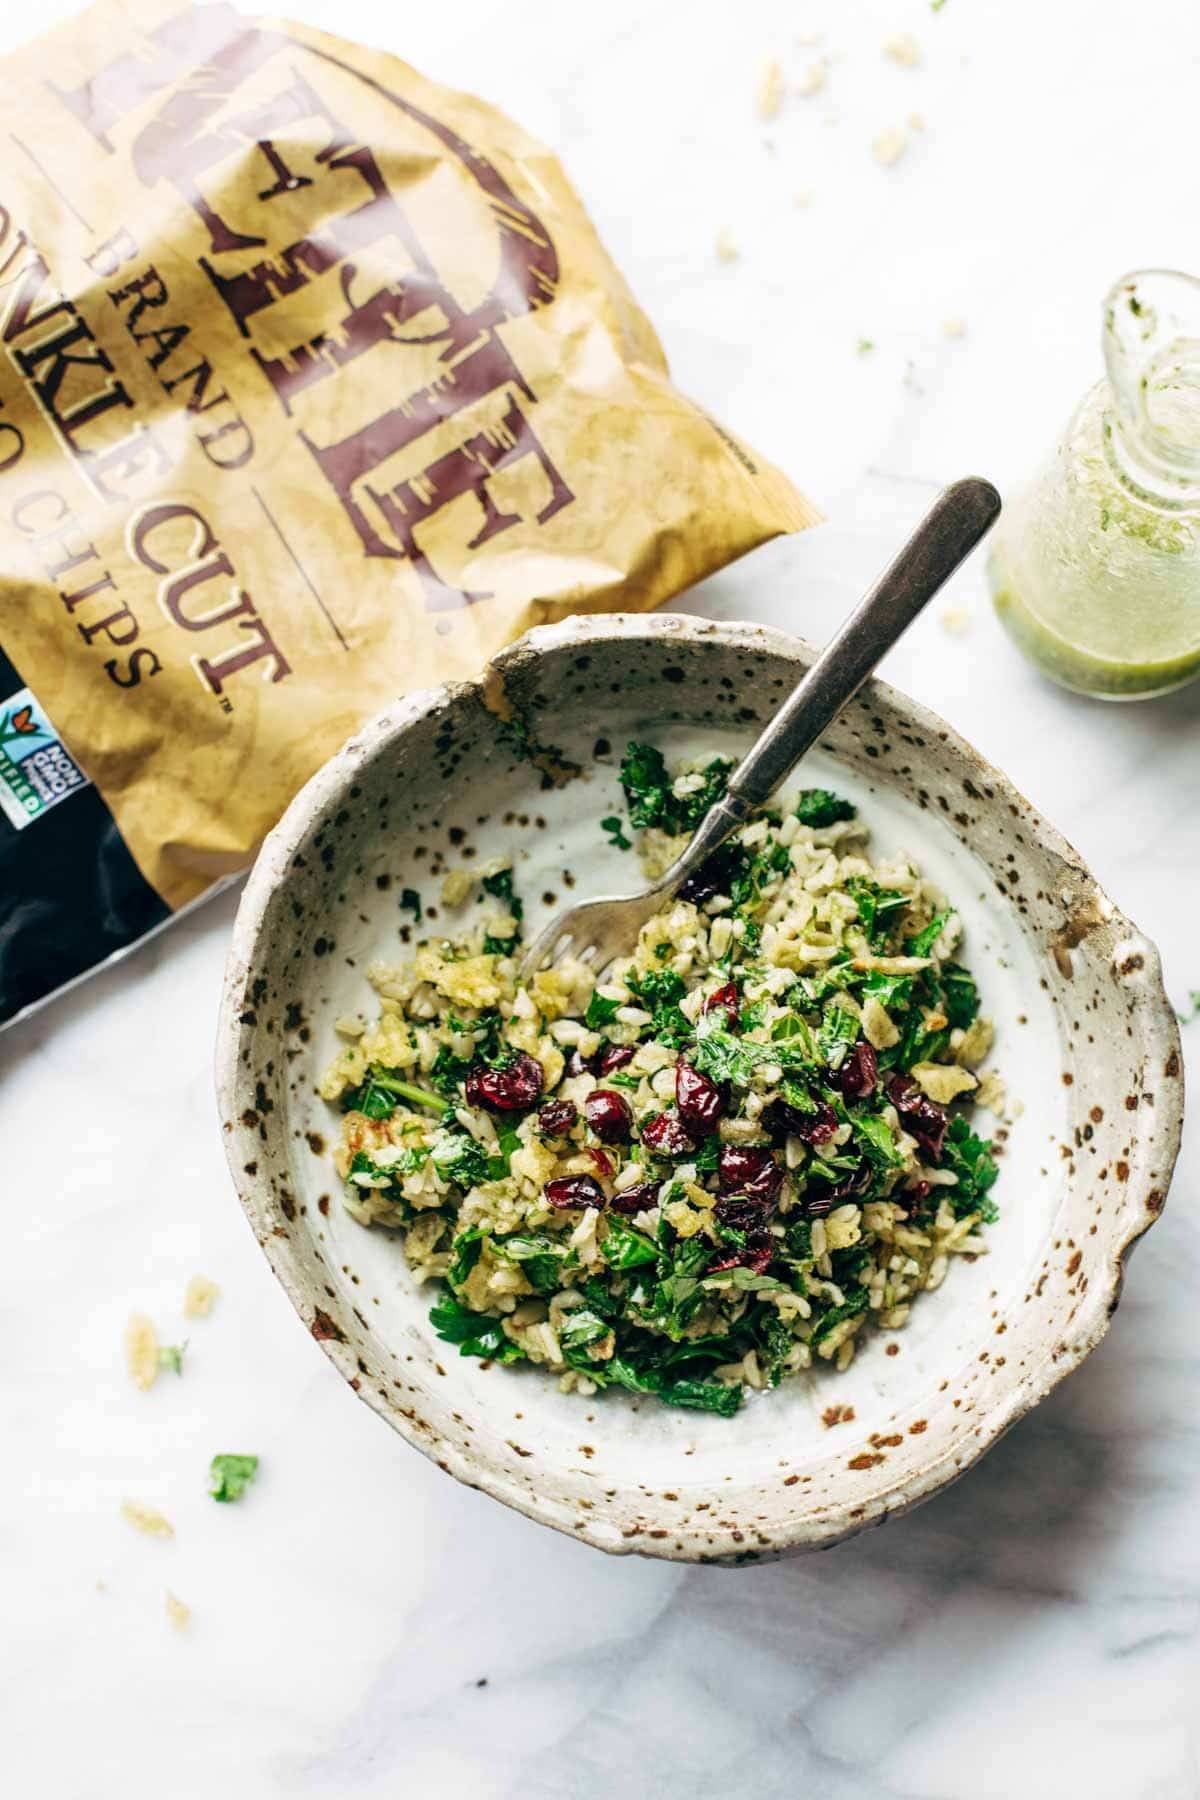 Garlic Kale and Brown Rice Salad with a zippy lemon herb dressing! This side dish recipe is so simple and it compliments almost any main dish! | pinchofyum.com